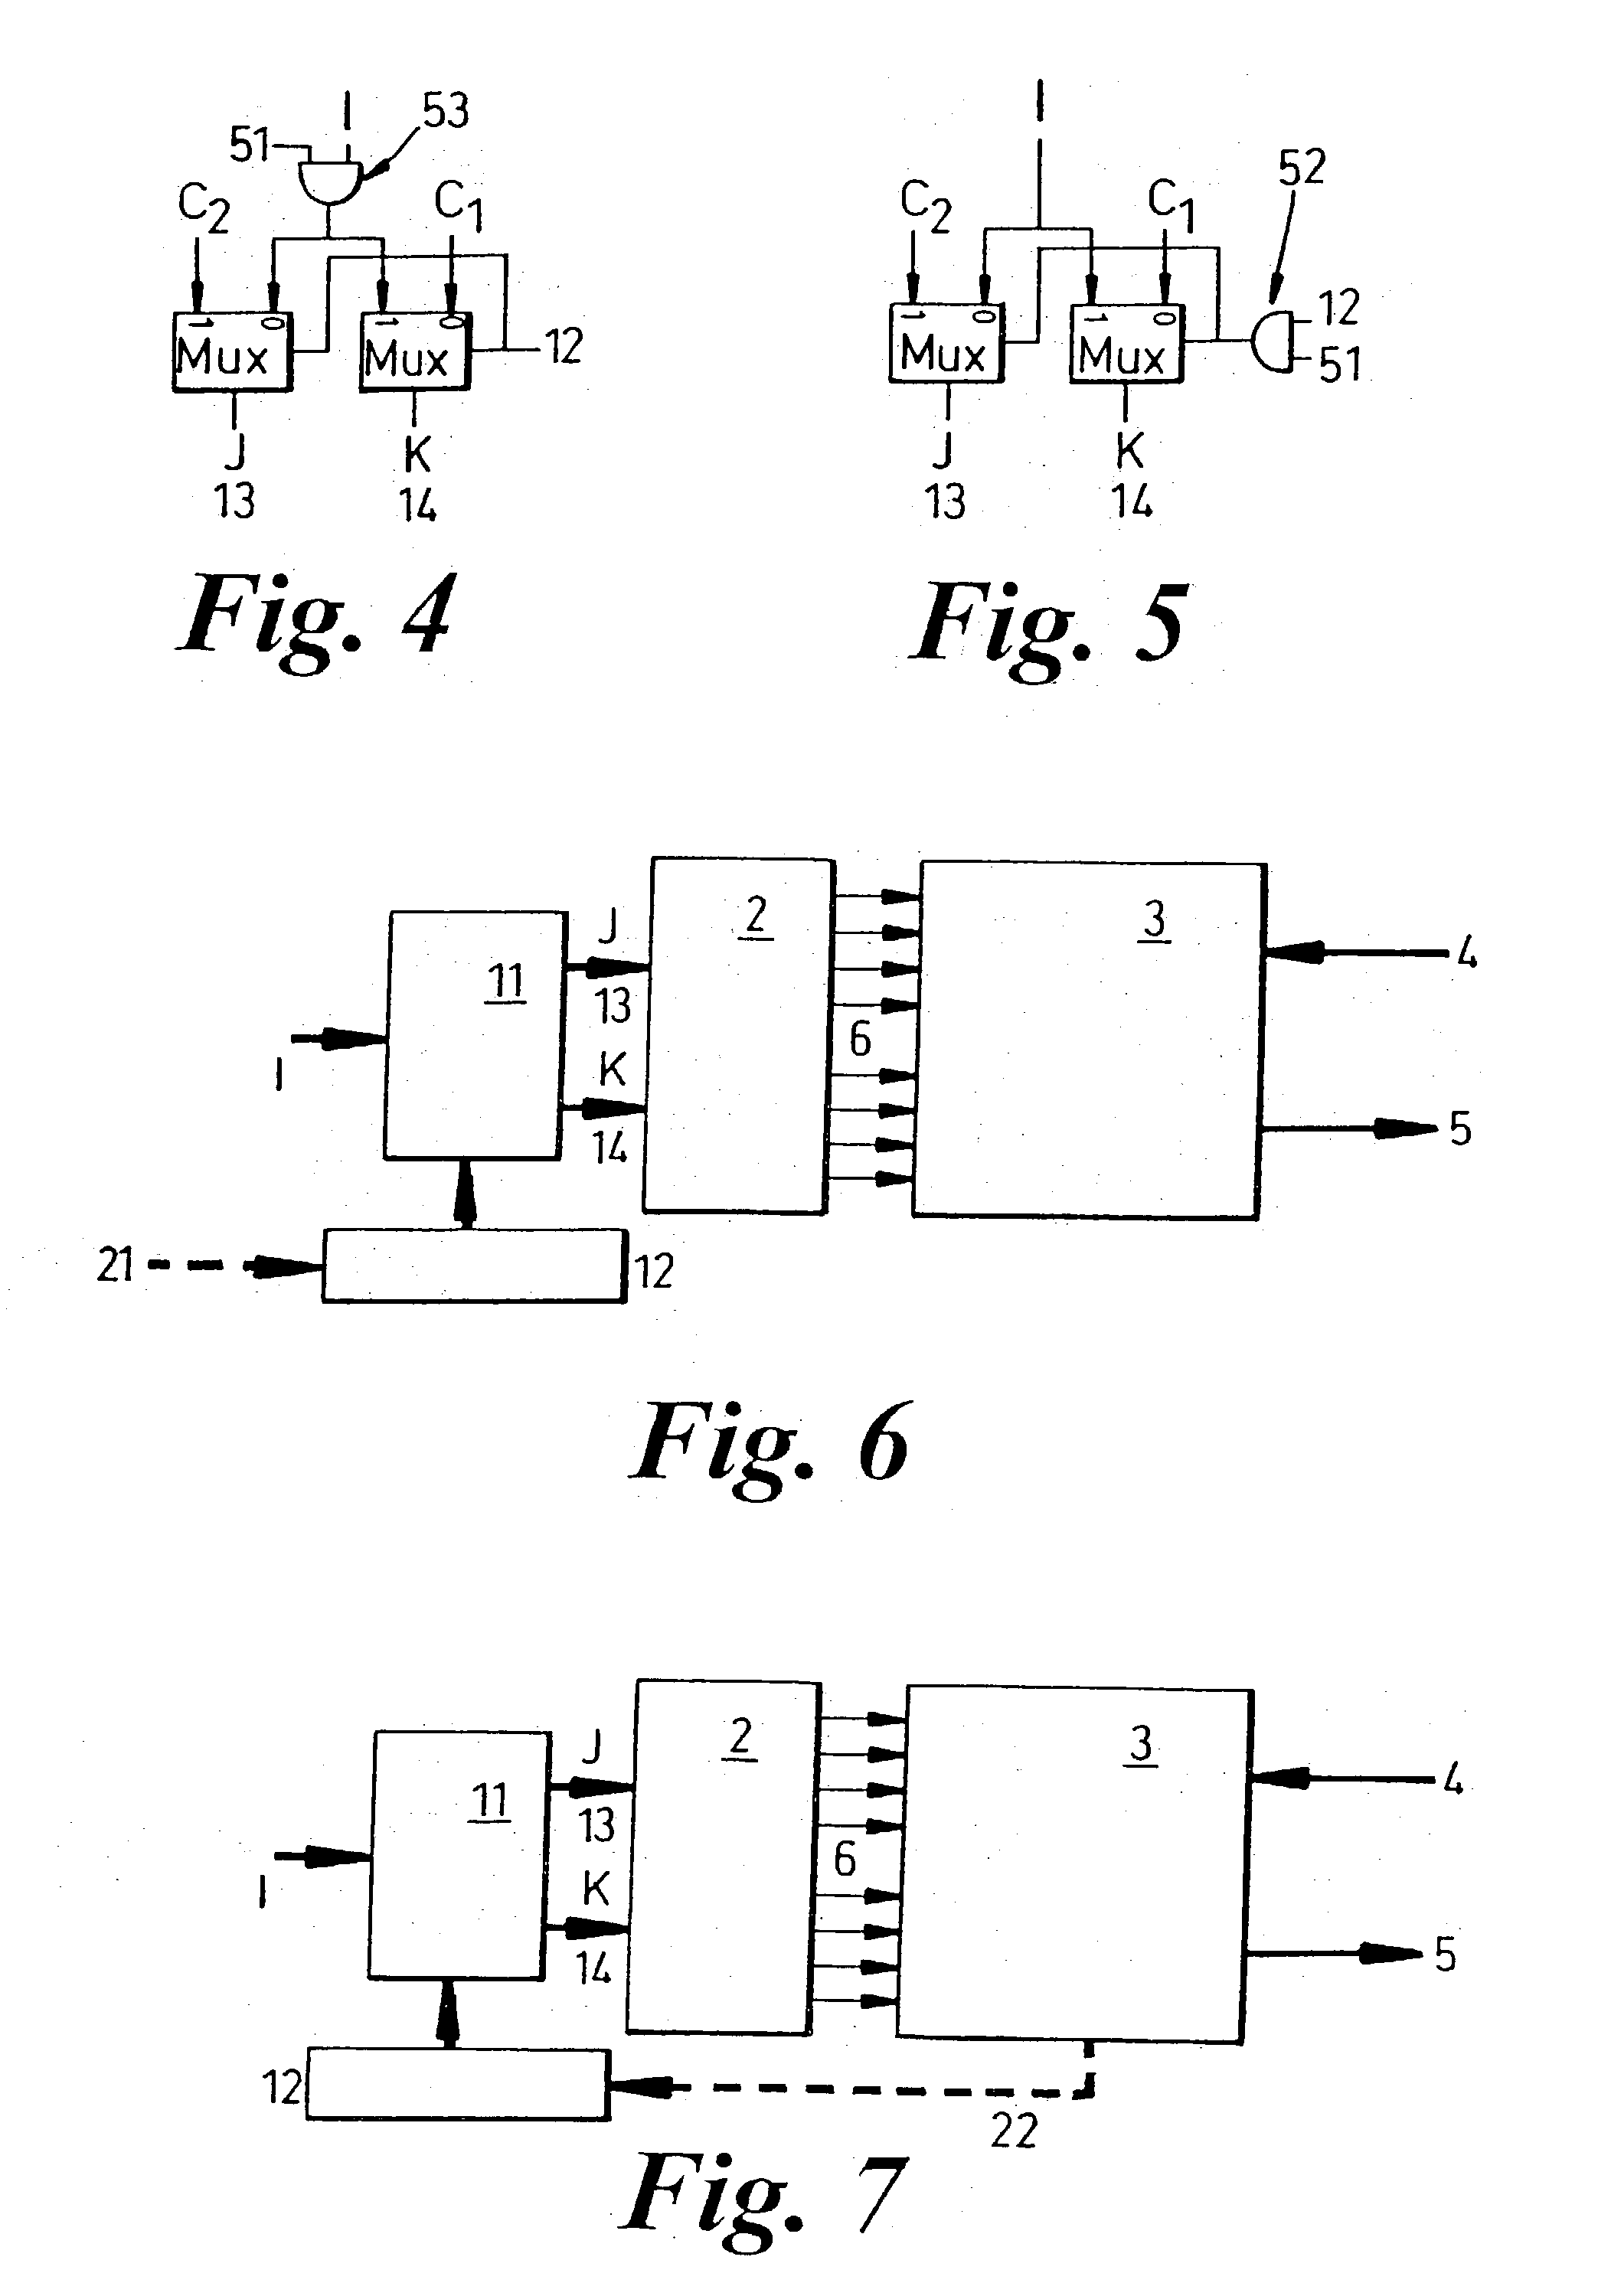 Method and apparatus for varying instruction streams provided to a processing device using masks